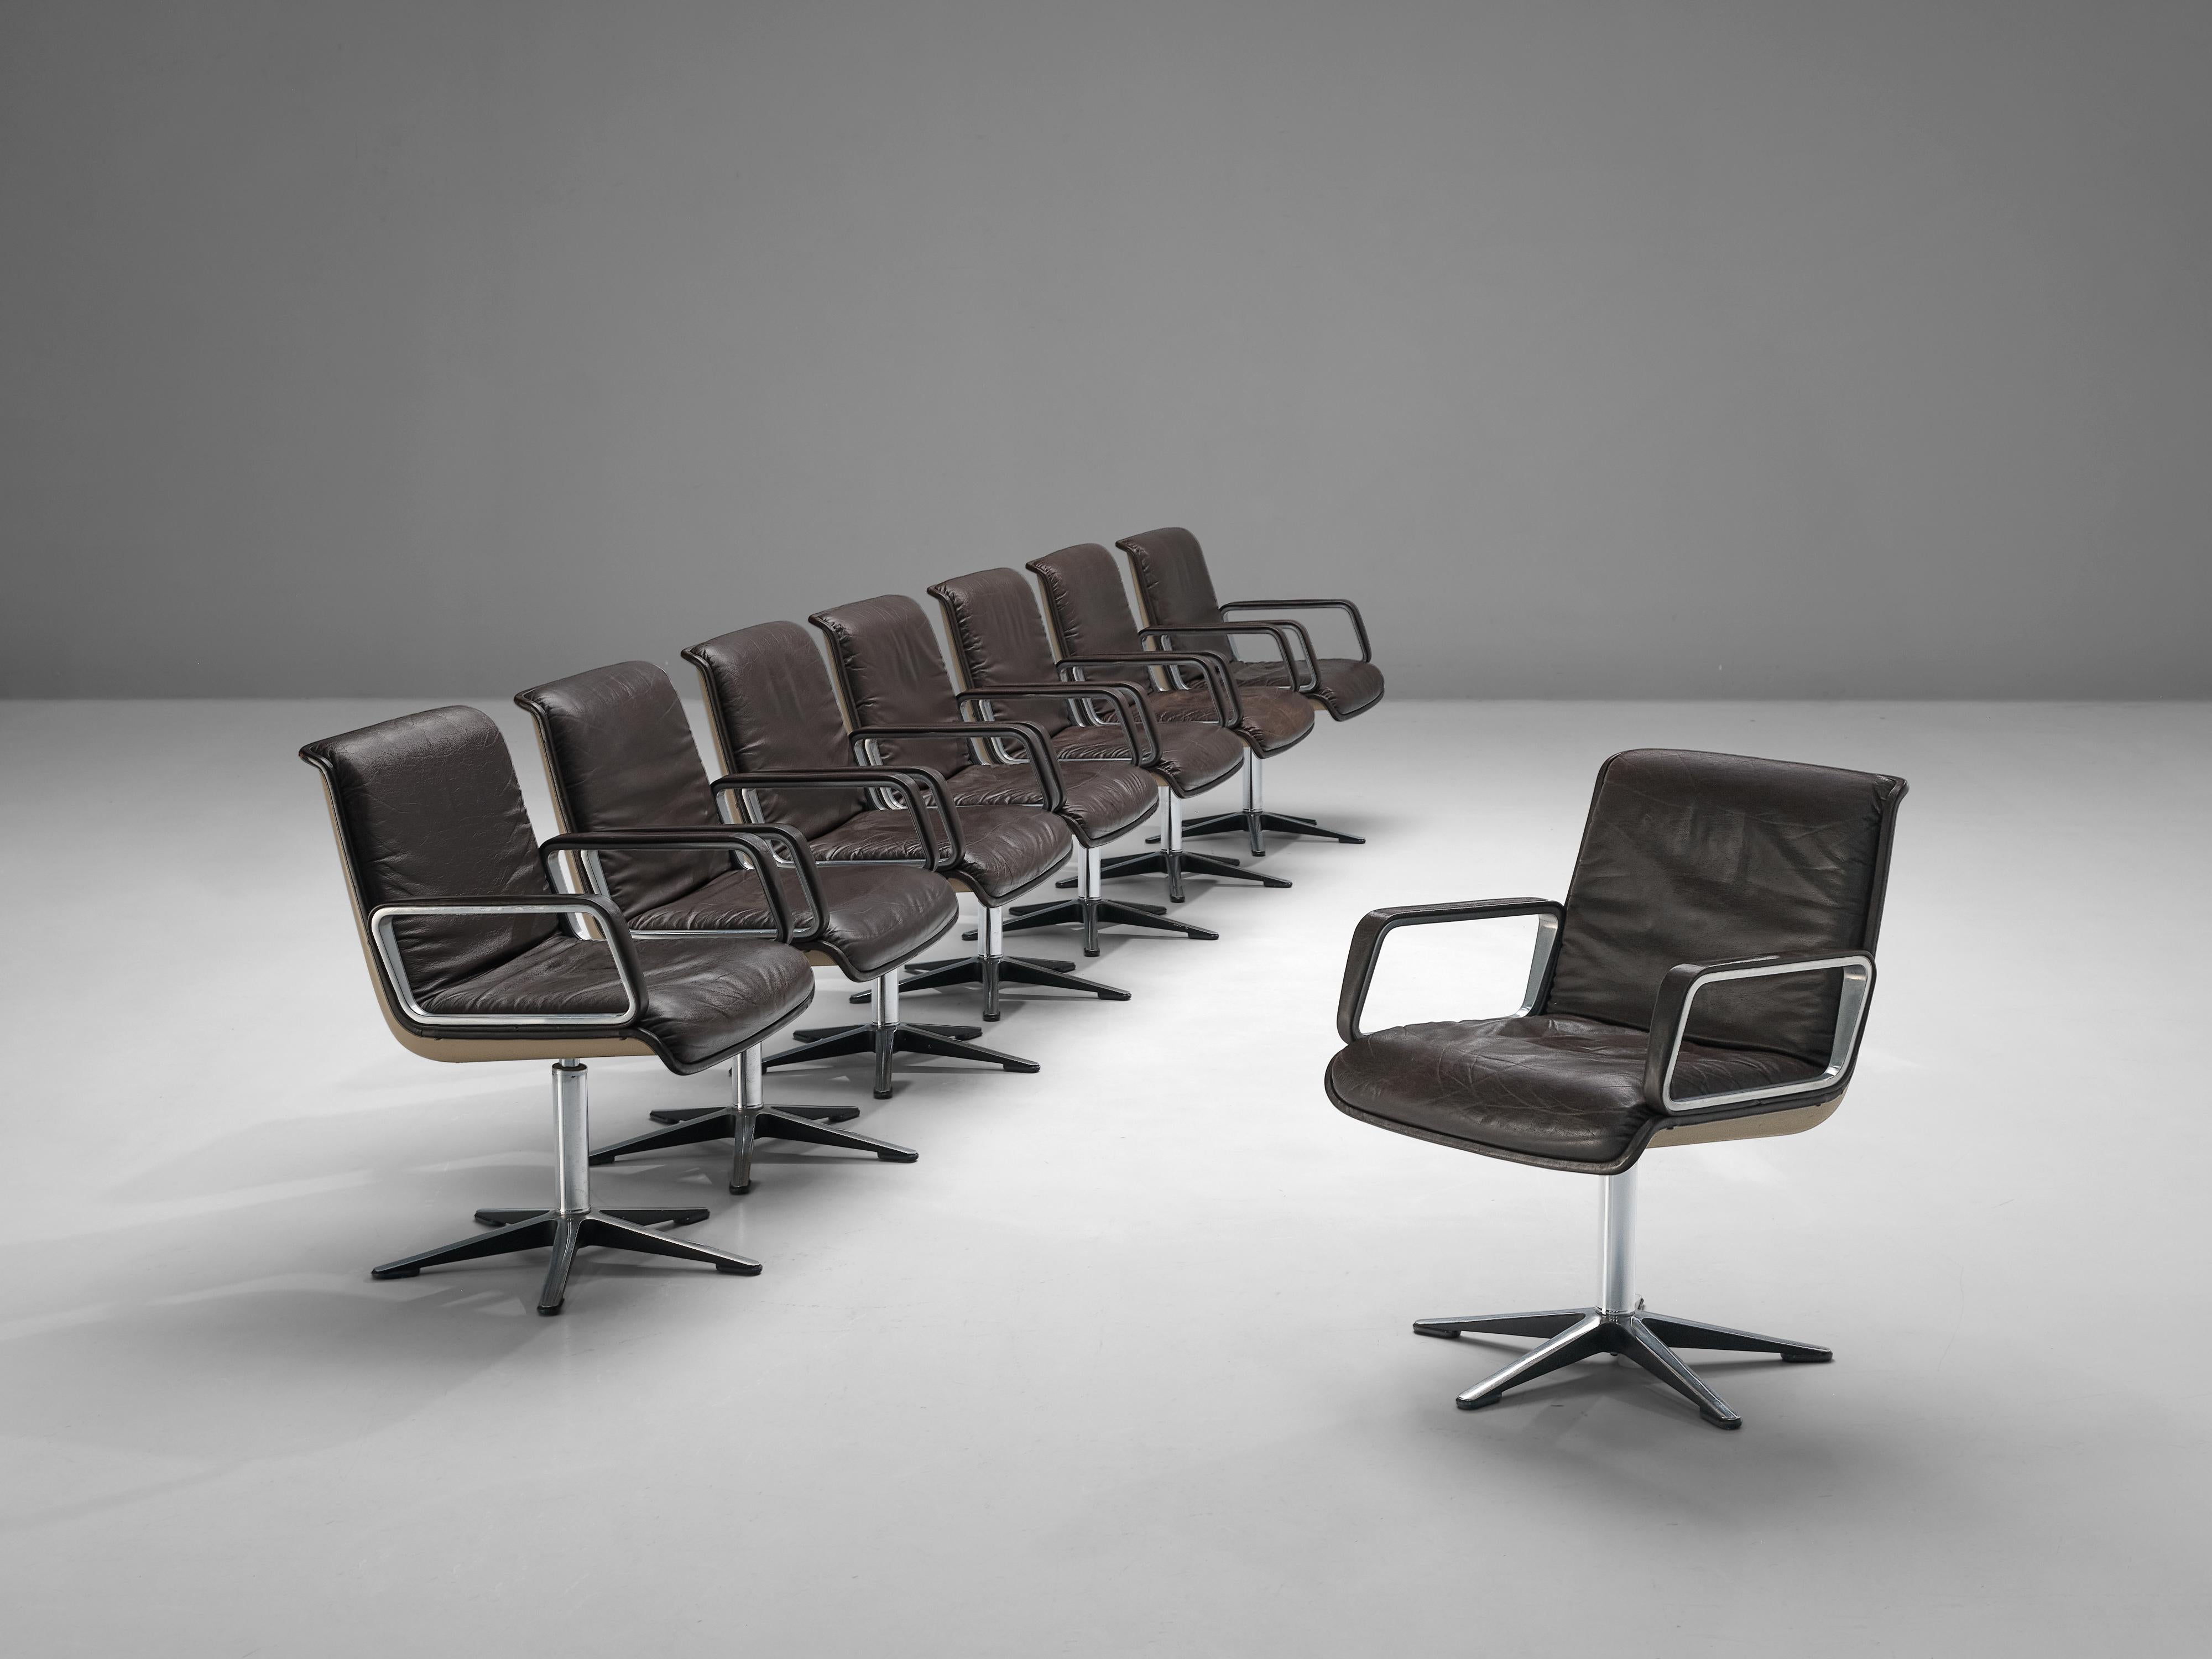 Delta Design for Wilkhahn, office chairs, leather, aluminum, plastic, metal, Germany, 1970s

Comfortable German office chairs with padded leather seats. The shell of these chairs is made in a light brown plastic. The five star base and armrests are